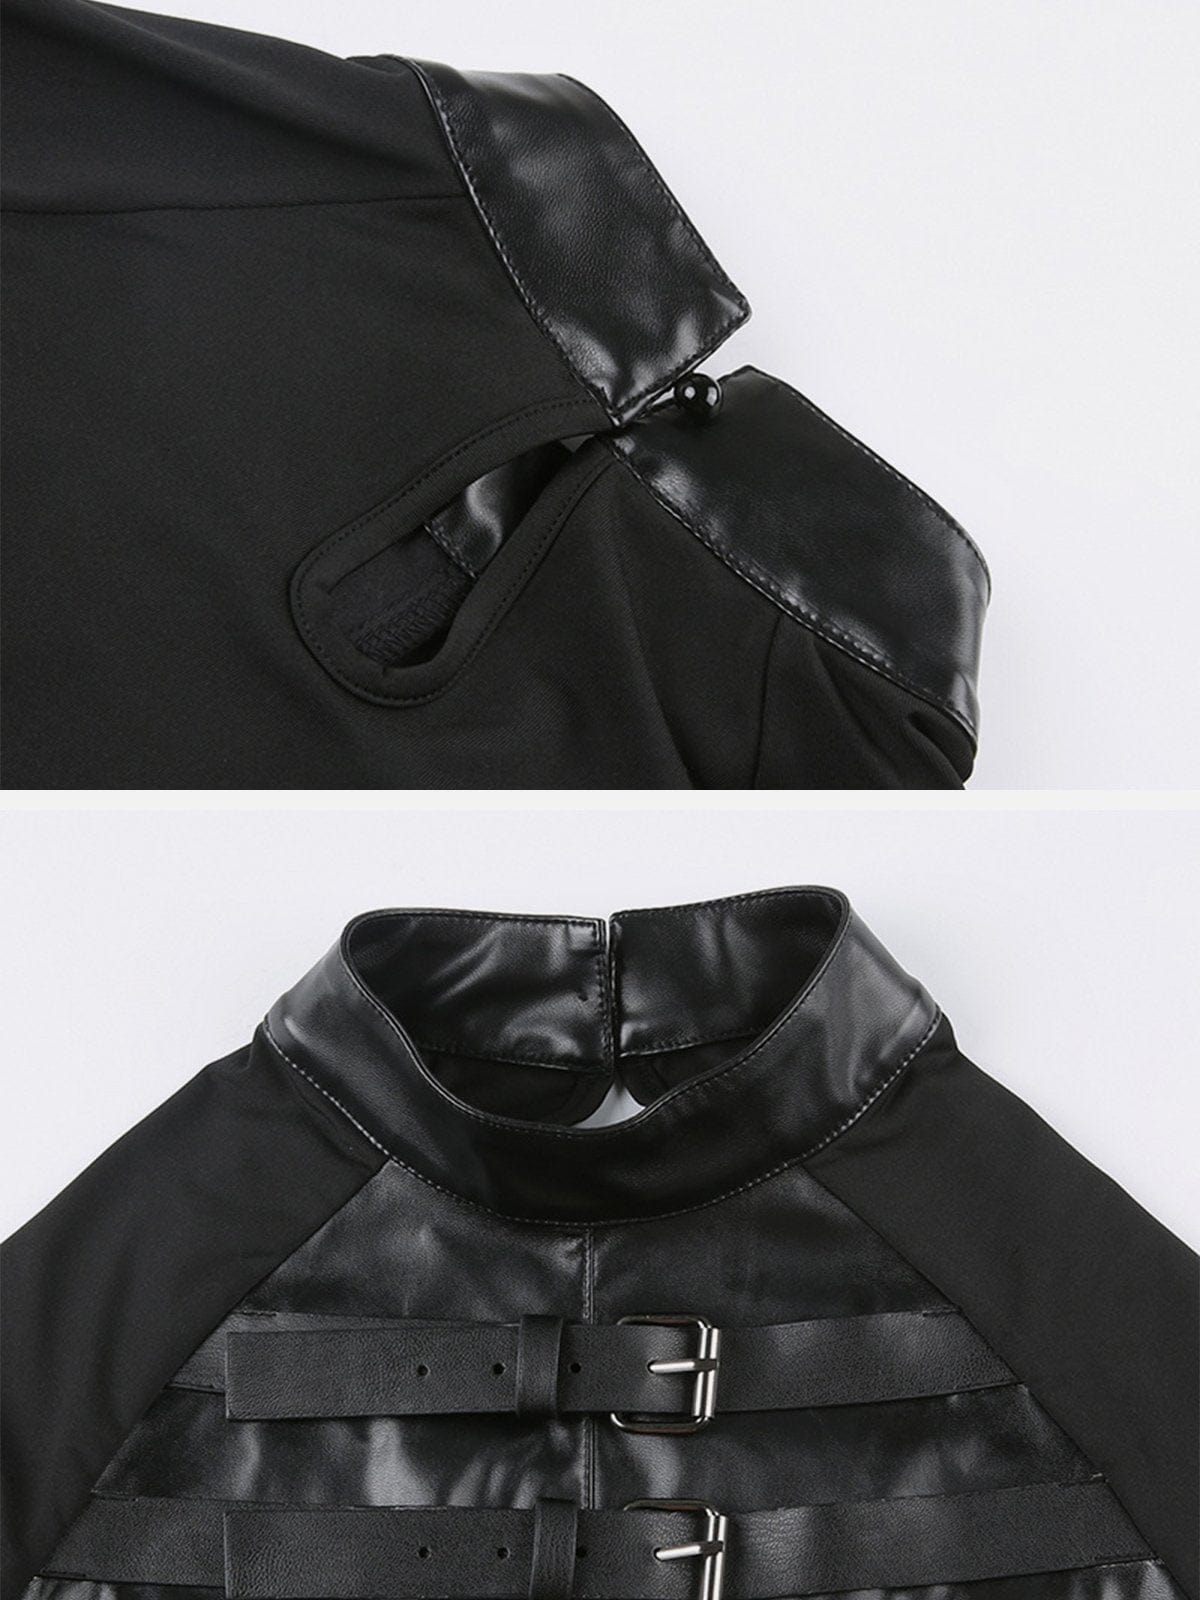 TO Leather Metal Buckle Long Sleeve Corp T Shirt